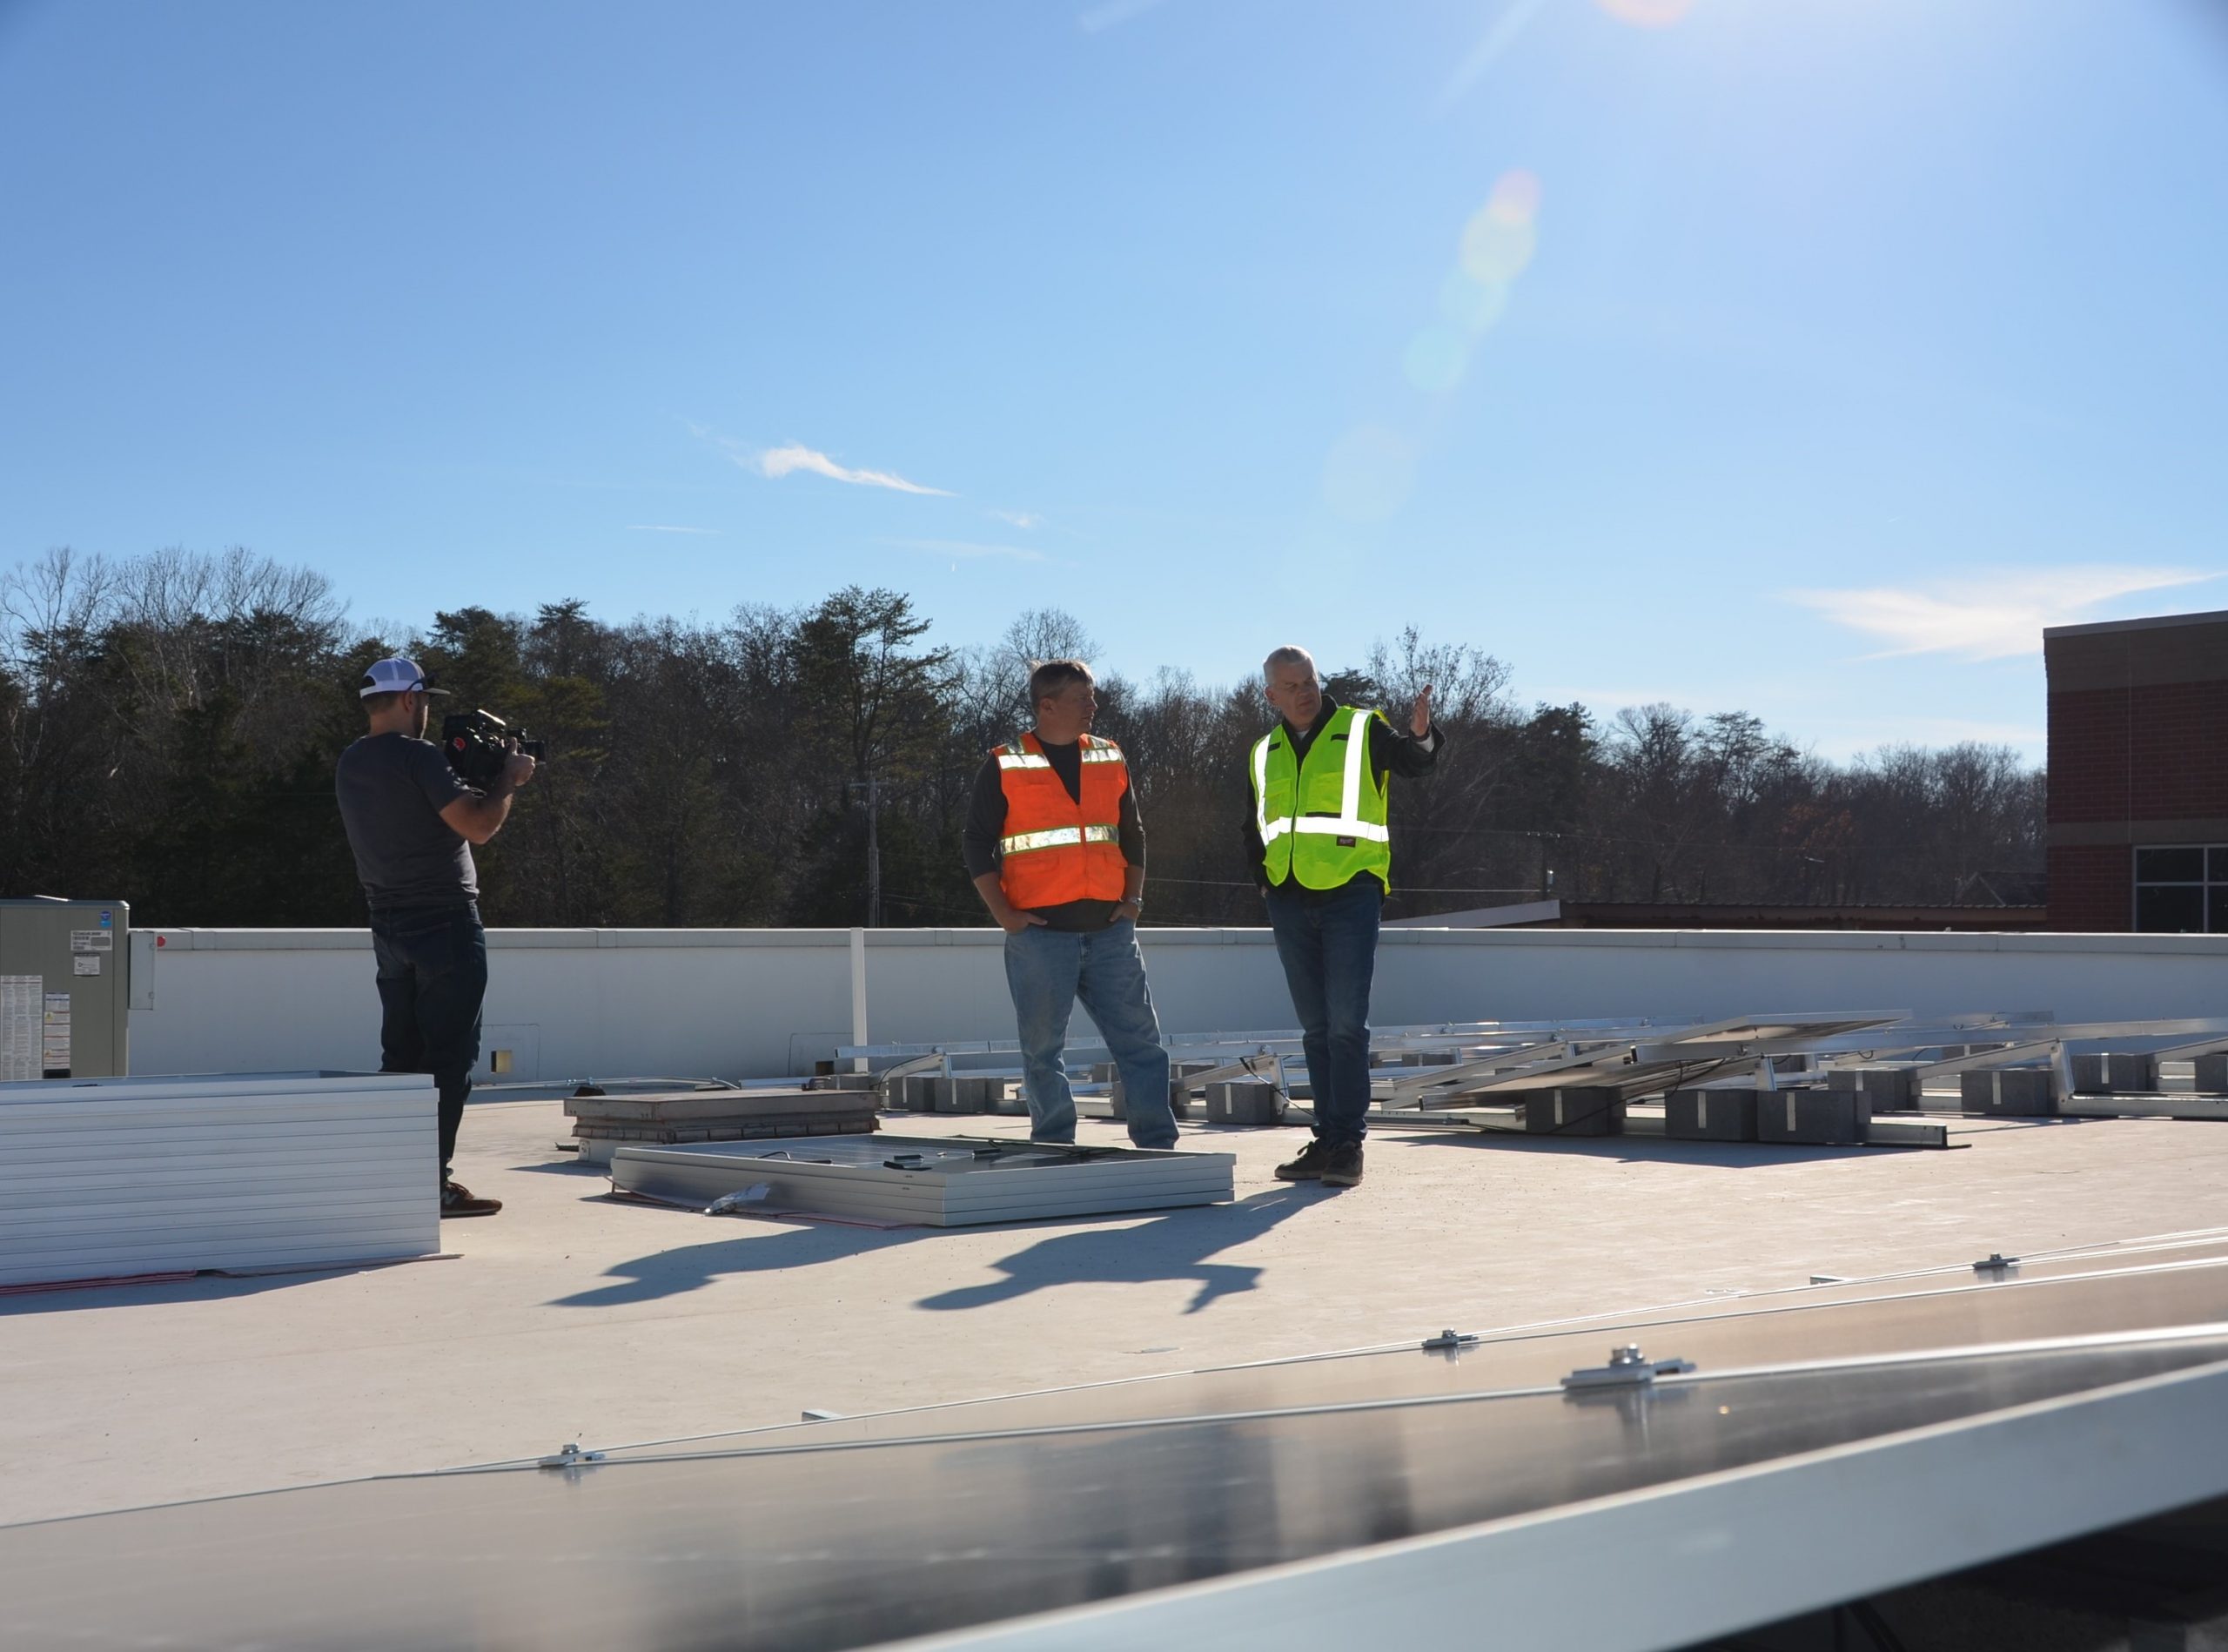 Business owners oversees solar installation on his office building.